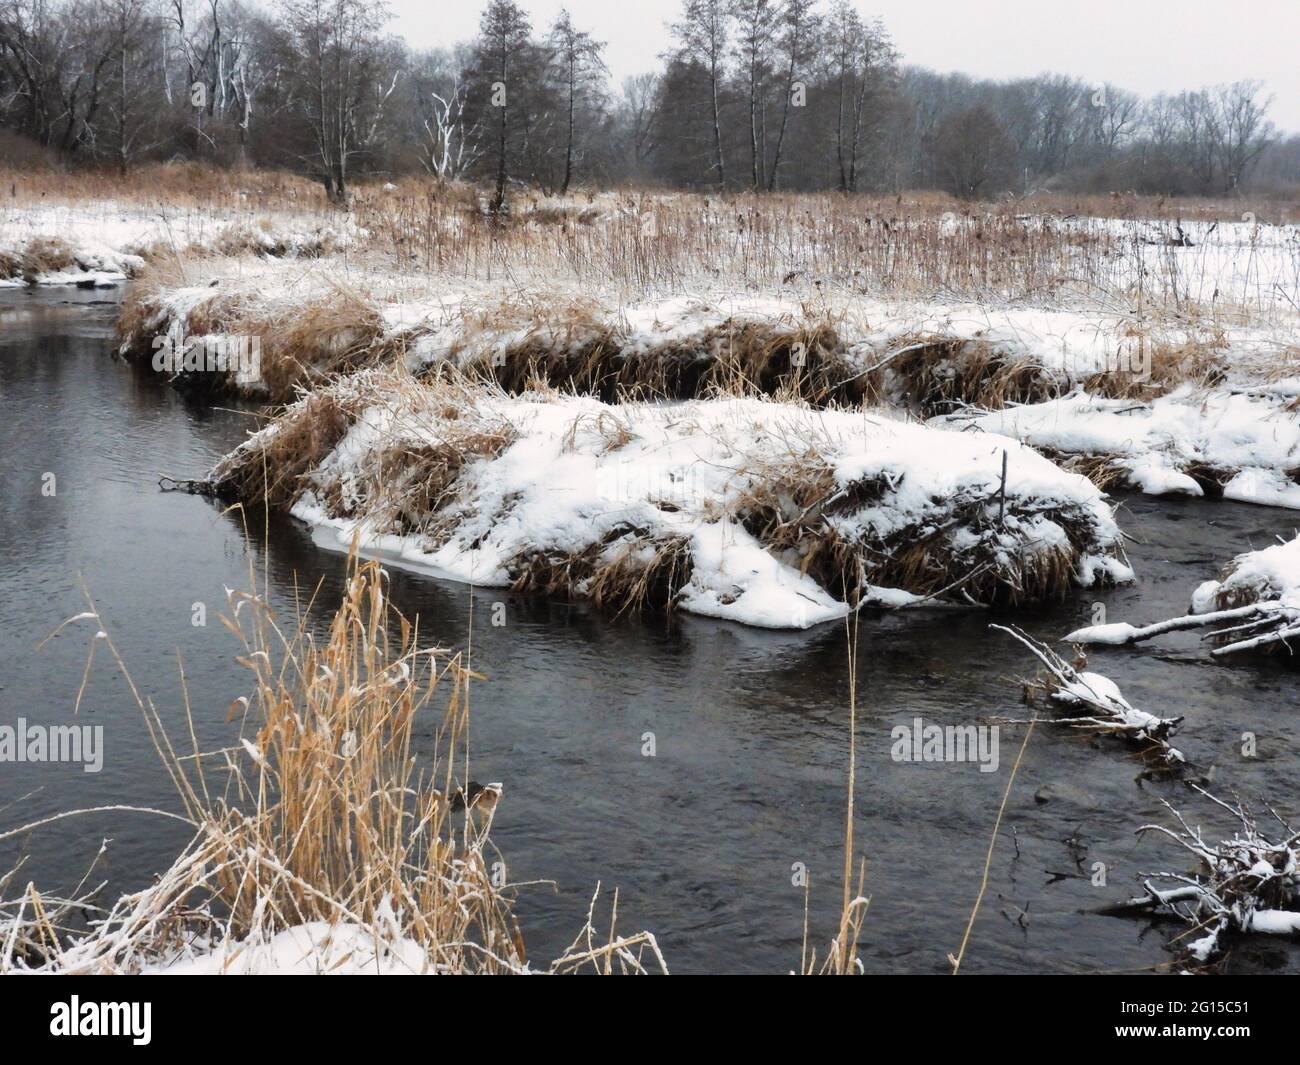 Large Muskrat Den on the Curve in a Creek: A large muskrat family lodge near the banks of a curving creek made with mud and straw and snow covered Stock Photo